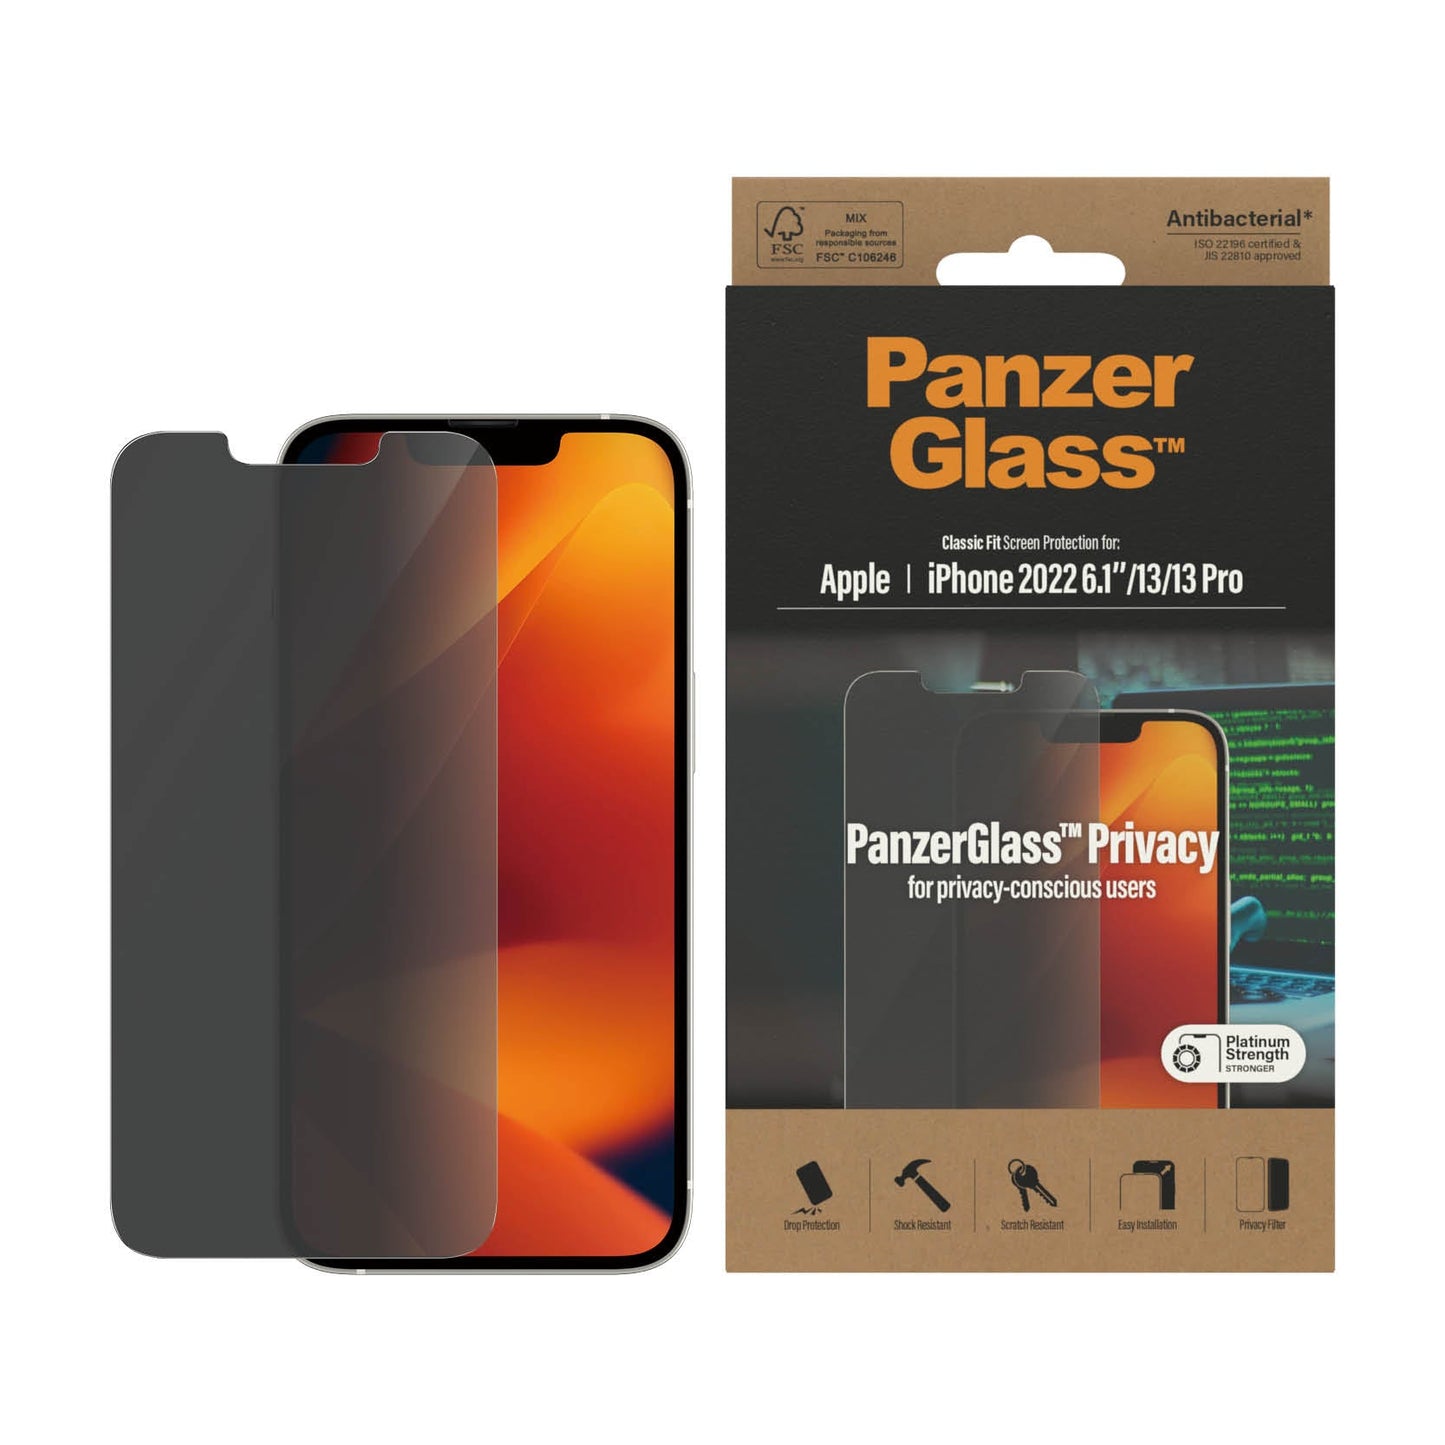 PanzerGlass™ Classic Fit Privacy Screen Protector for iPhone 14, iPhone 13/13 Pro